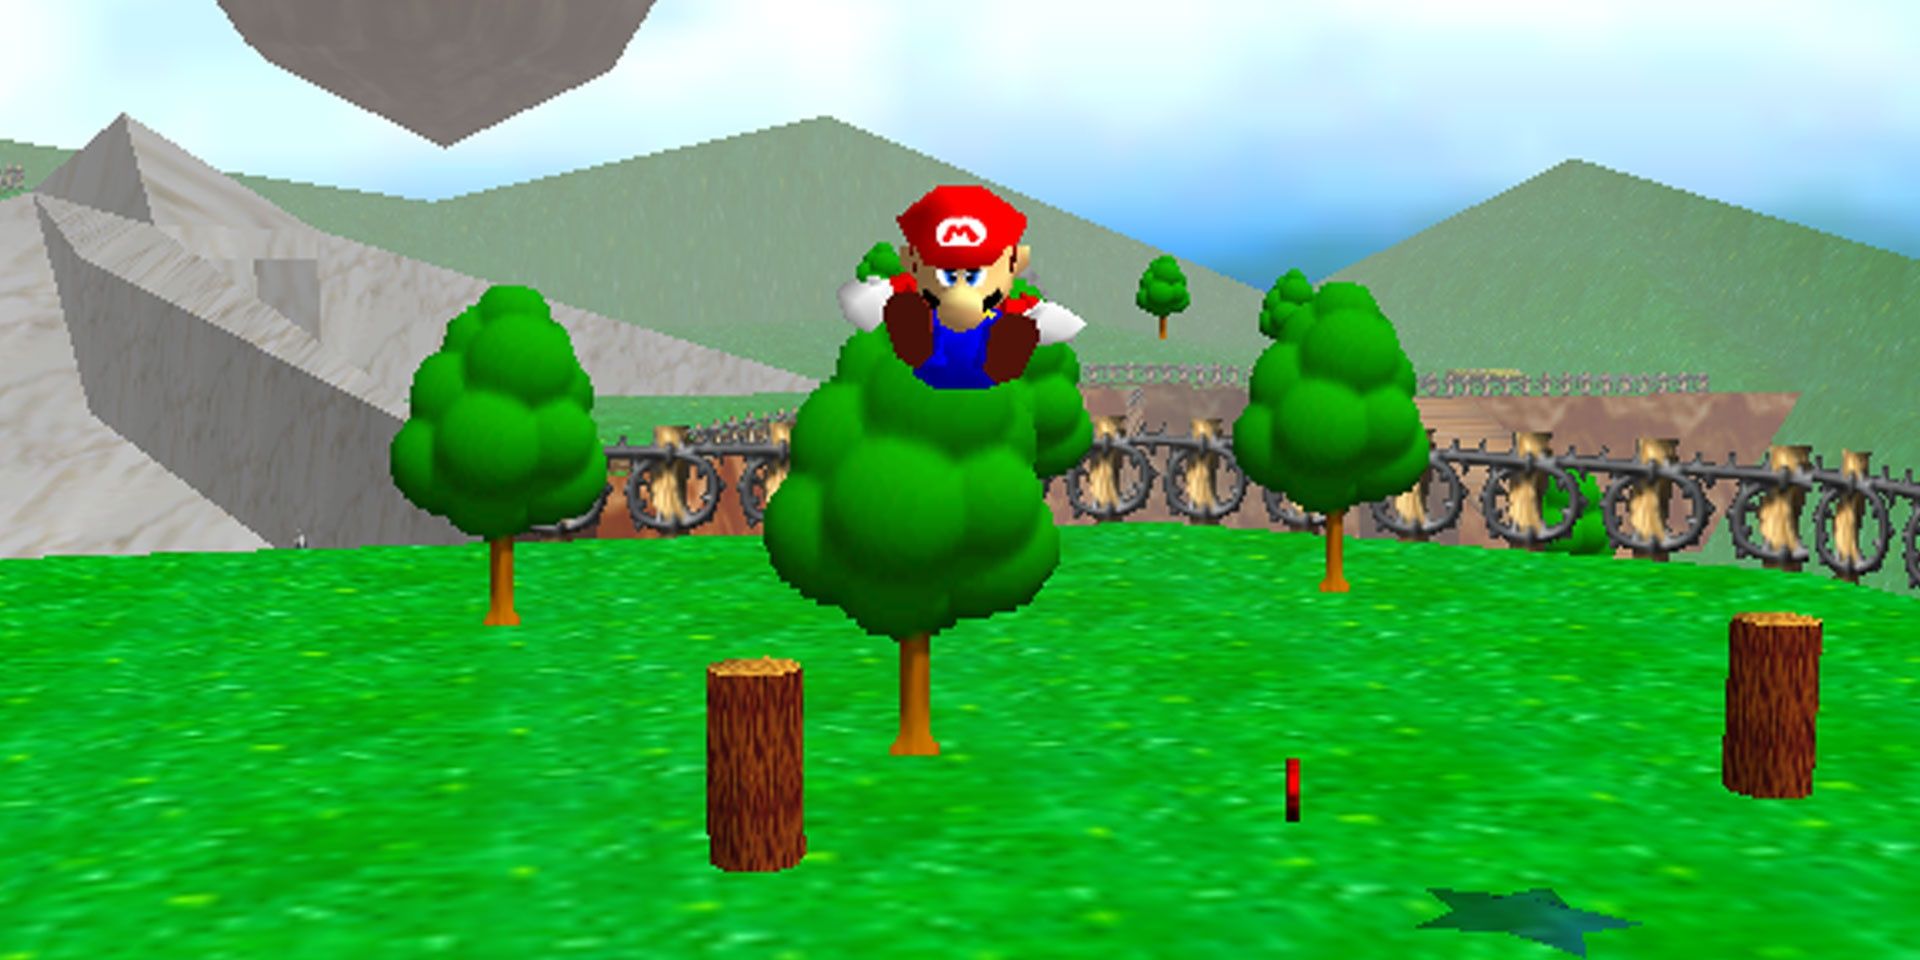 Mario jumping in Super Mario 64. There is also plenty of trees in the background